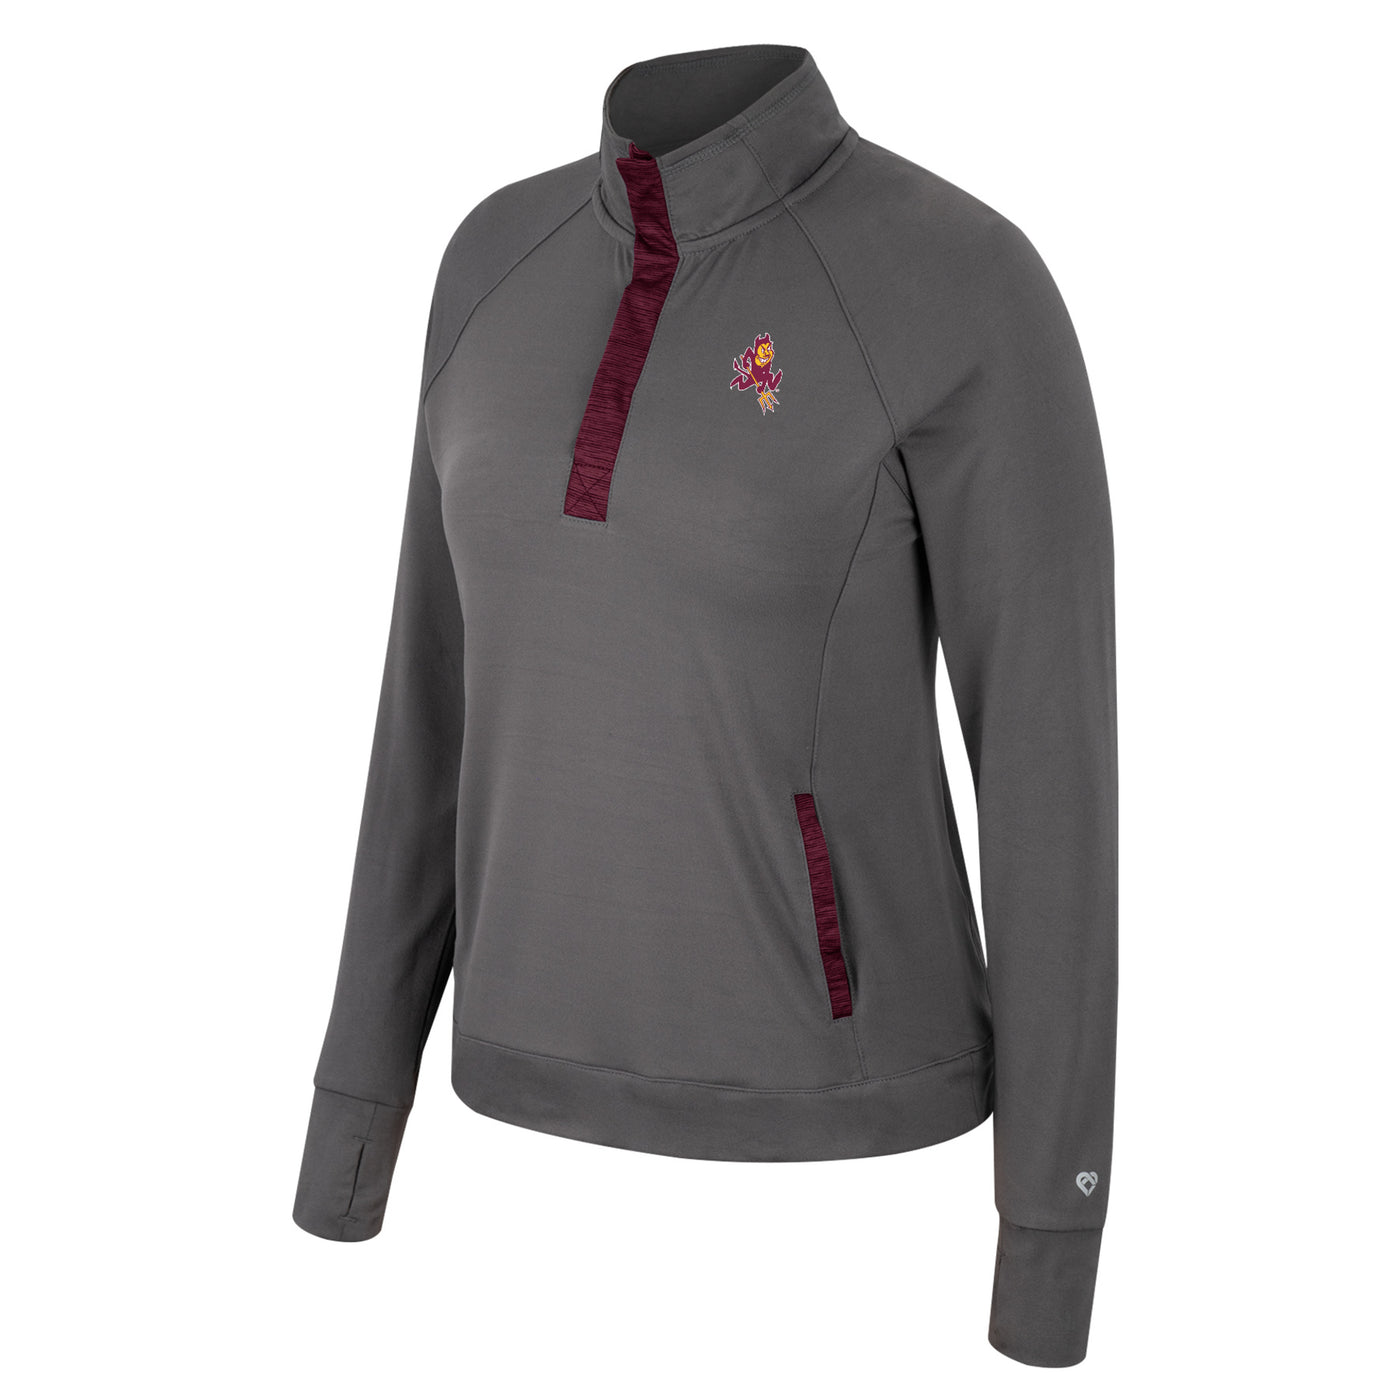 ASU gray women's 1/4 snap jacket with maroon detailing on the pocket and snap with Sparky on the chest and thumb holes